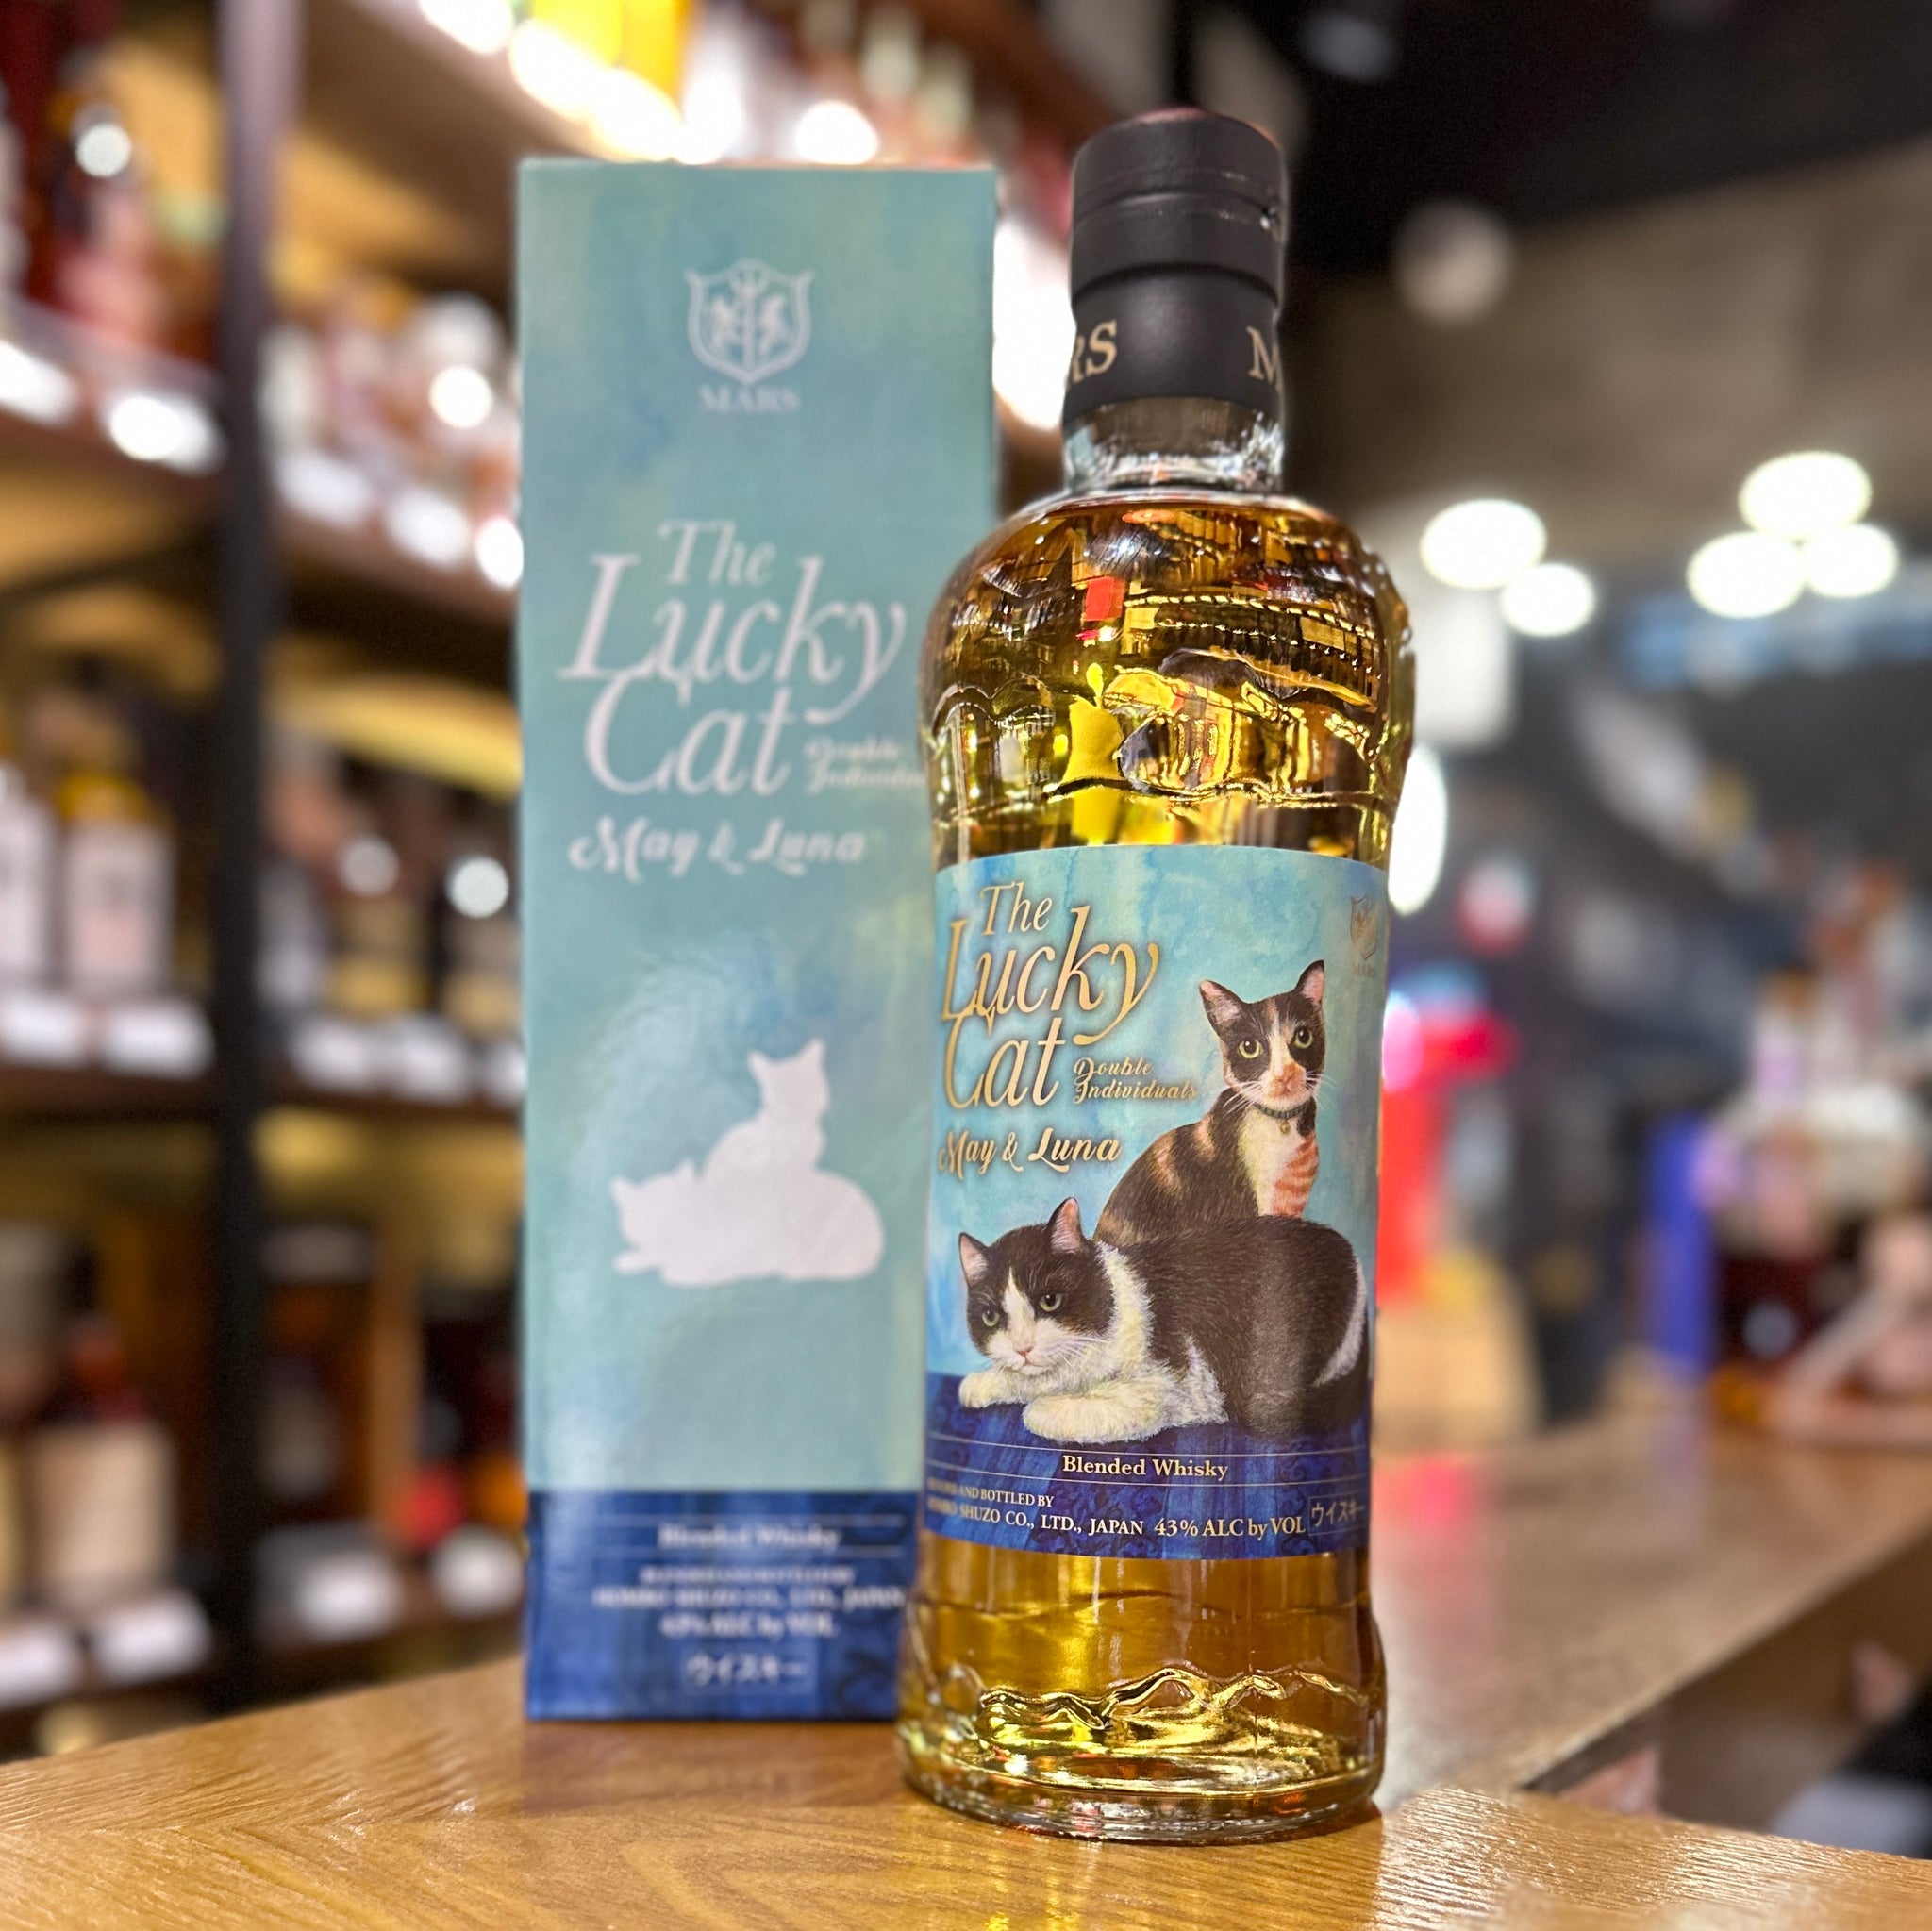 Mars The Lucky Cat Two Individuals May & Luna Blended Whisky